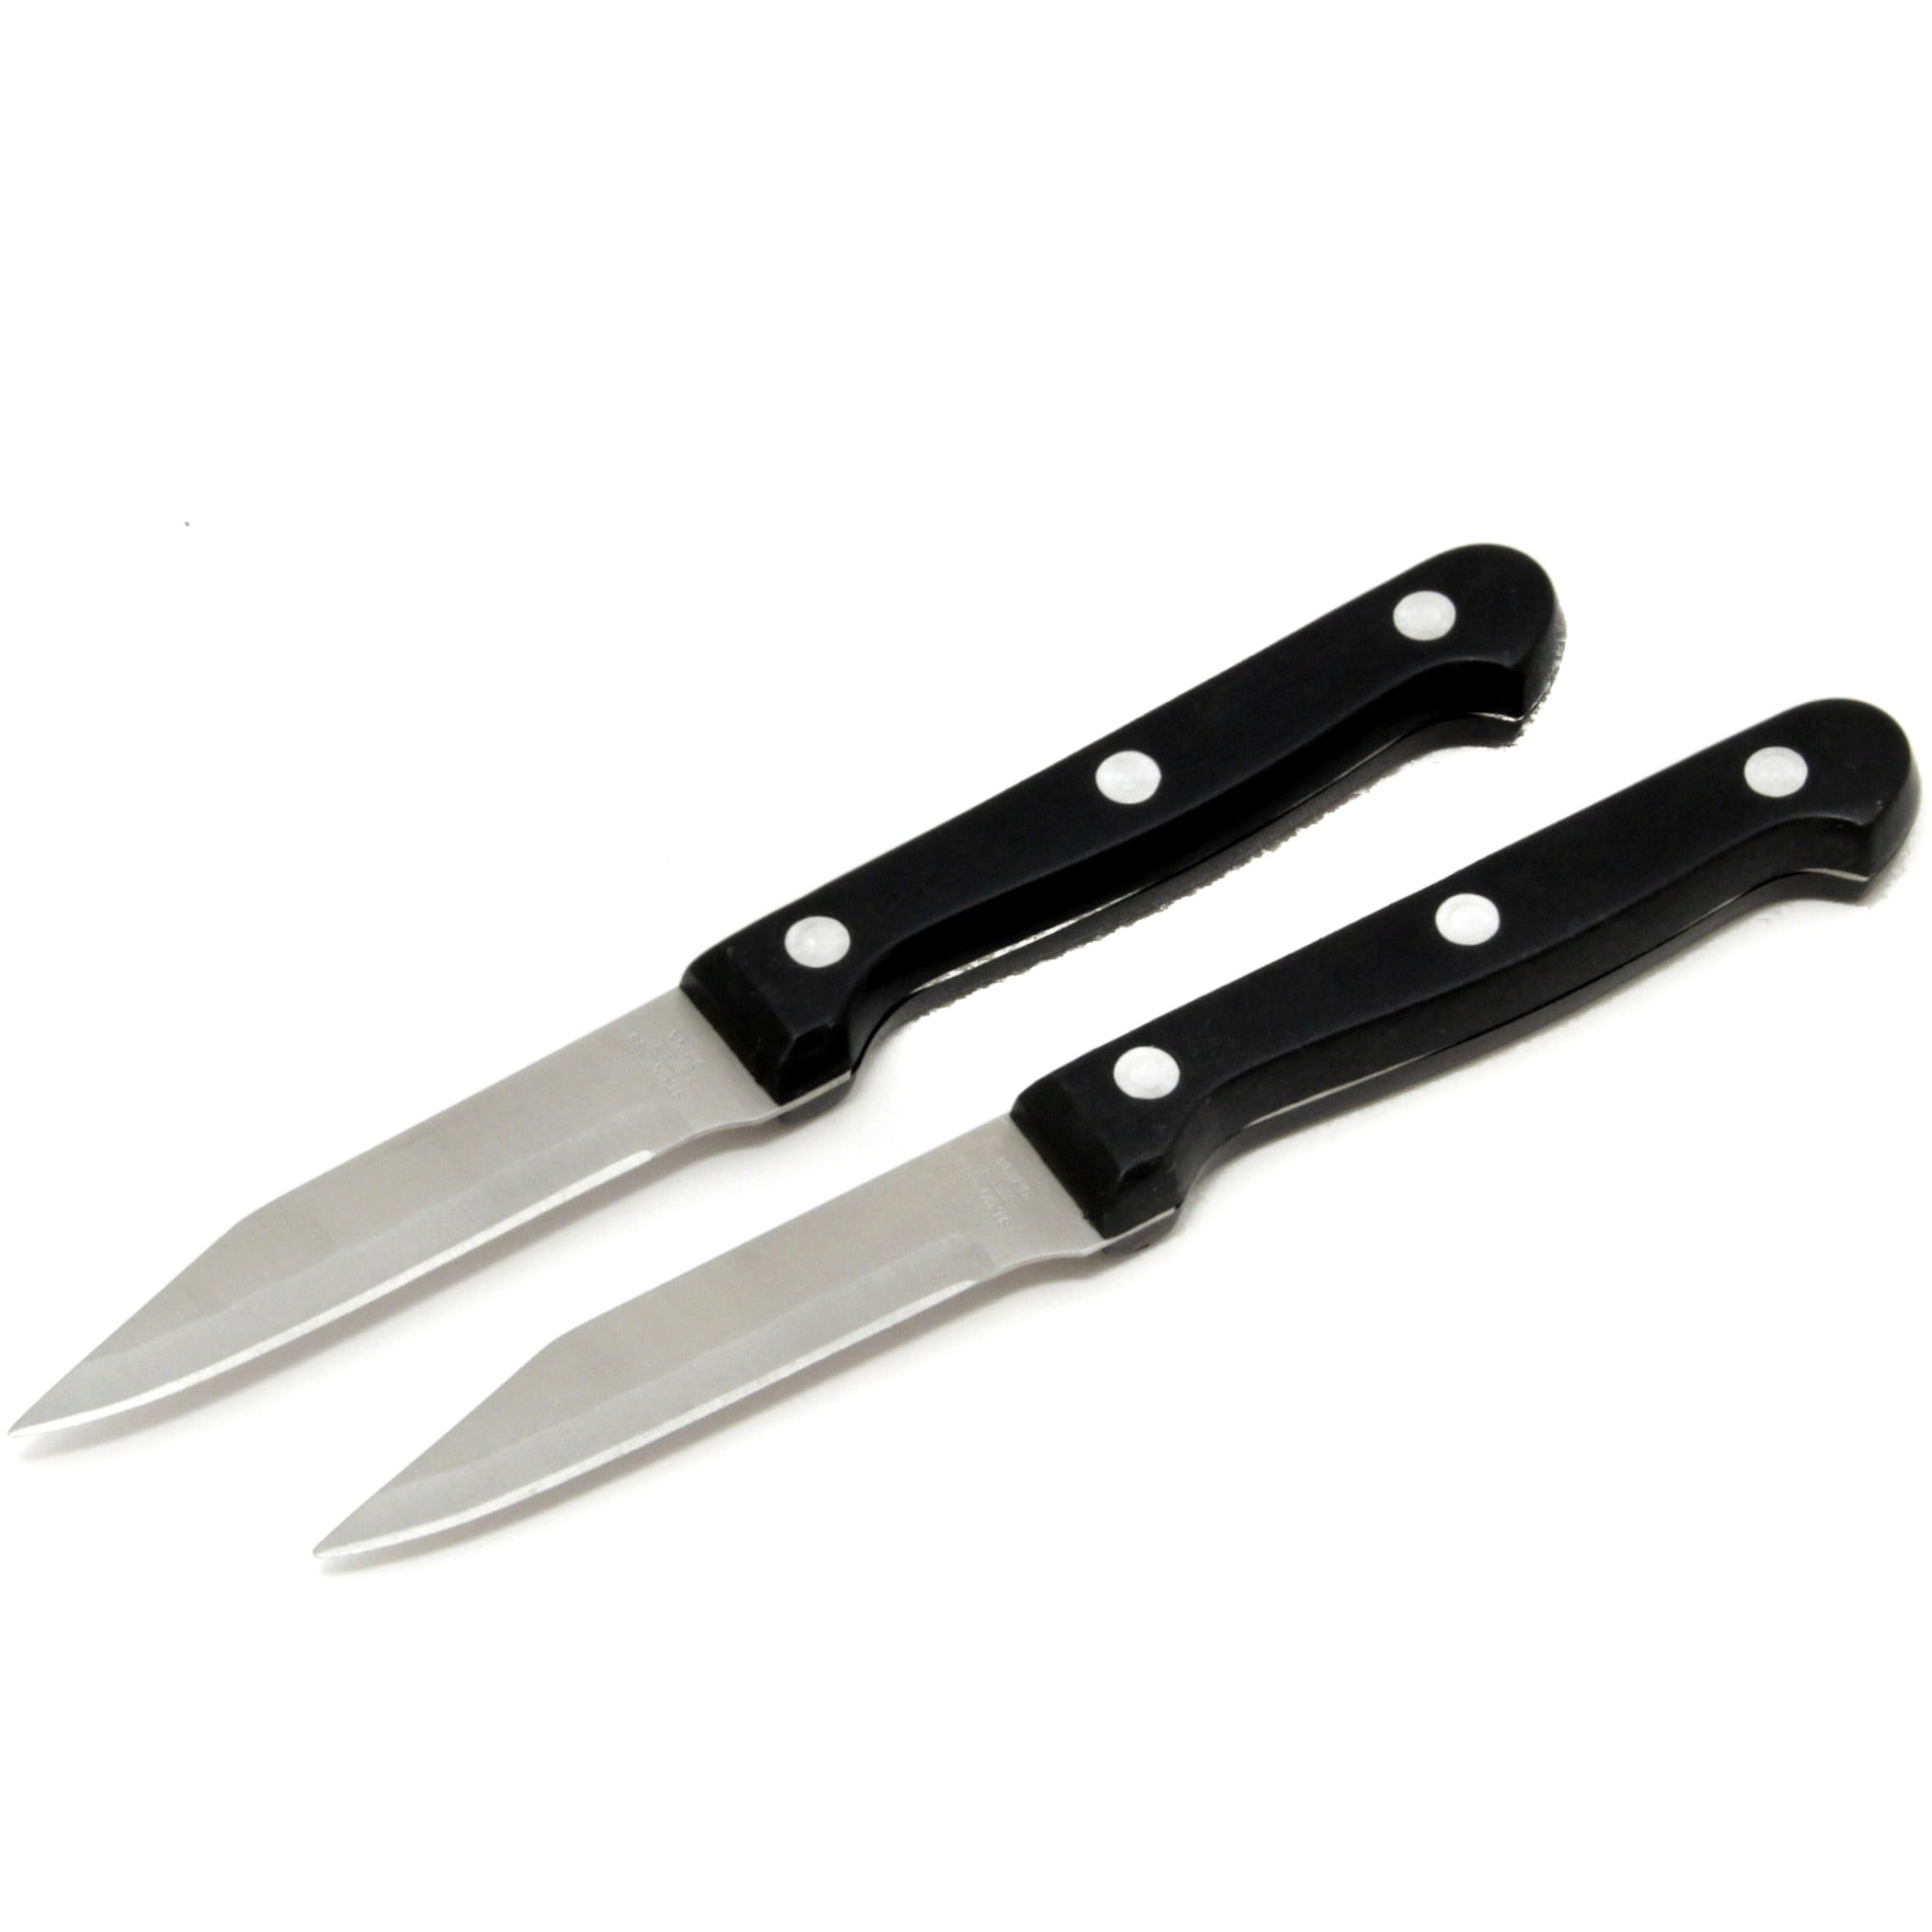 Martha Stewart Collection Paring Knives, Set of 2, Created for Macy's -  Macy's